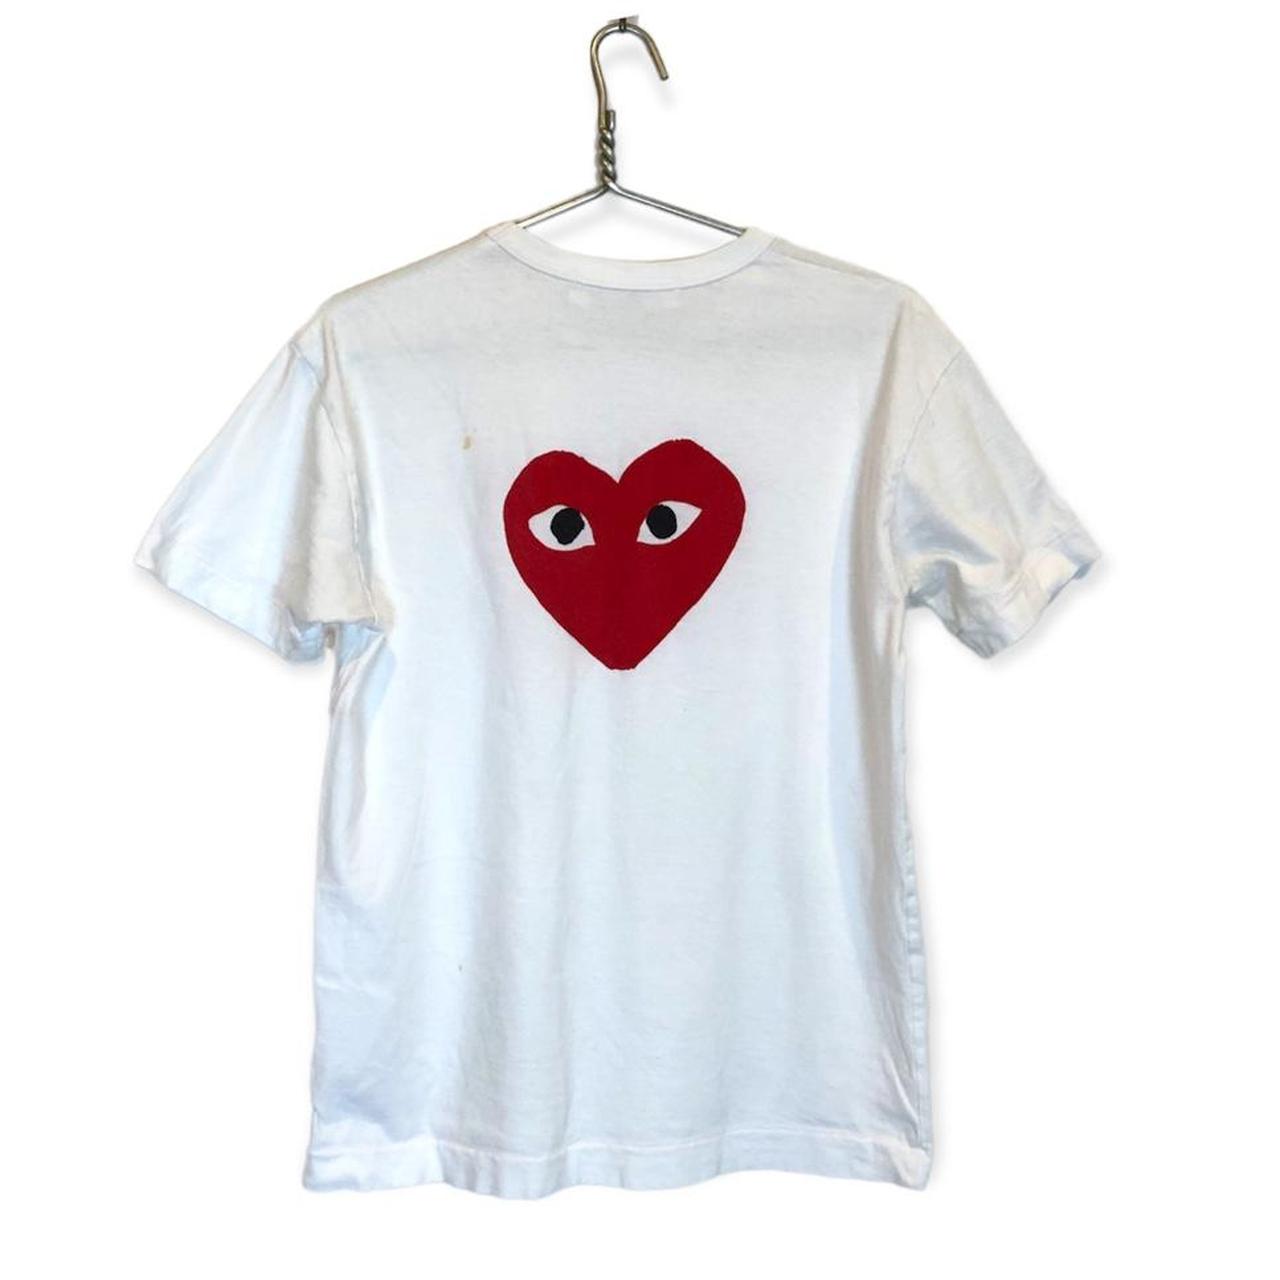 Comme des Garçons Play Women's White and Red T-shirt (2)